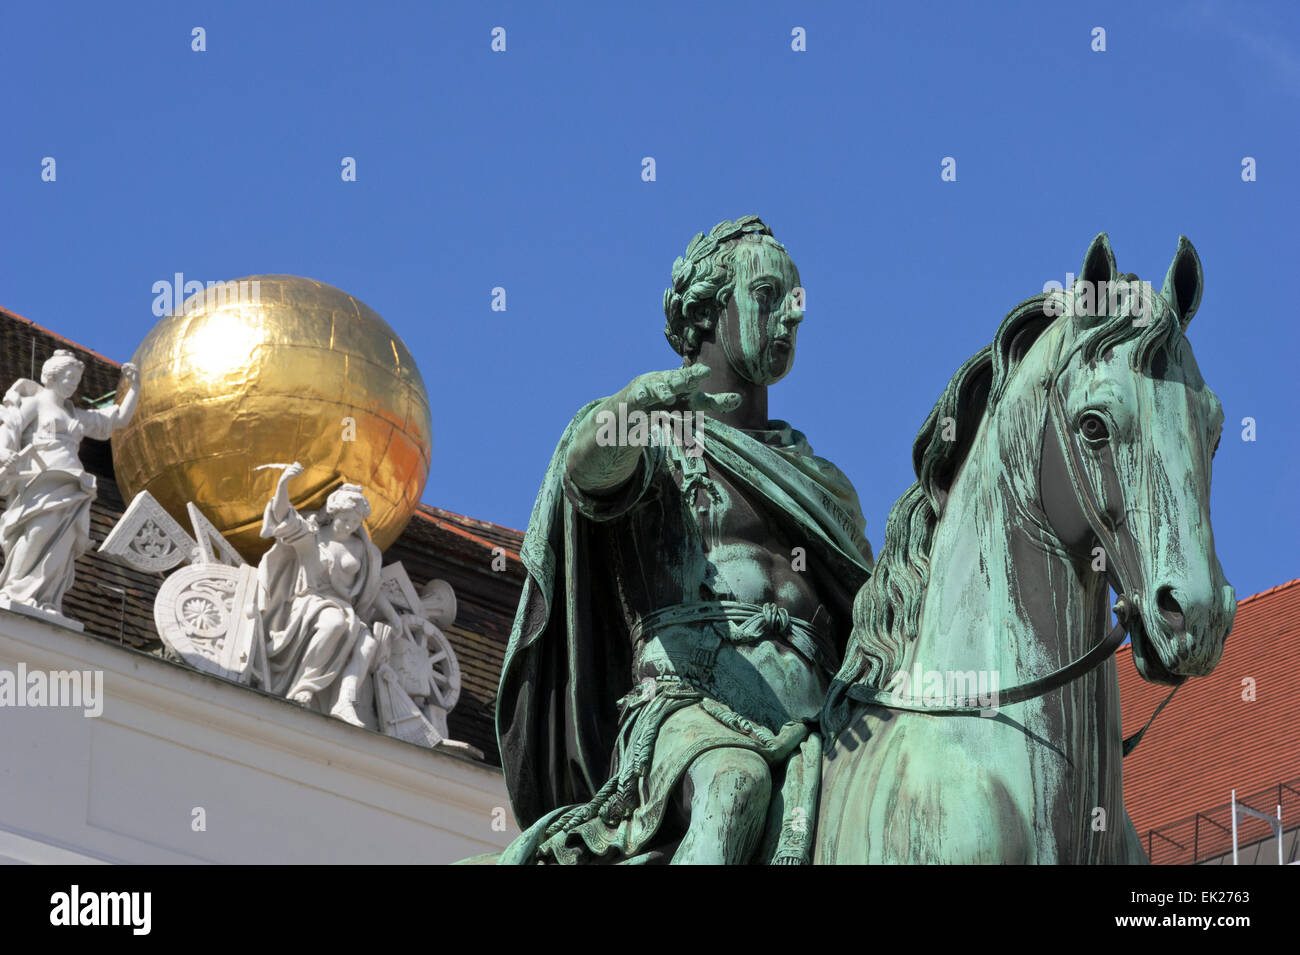 The statue of Emperor Joseph II on horseback with a golden globe on the roof of the Austrian National Library, Vienna, Austria. Stock Photo